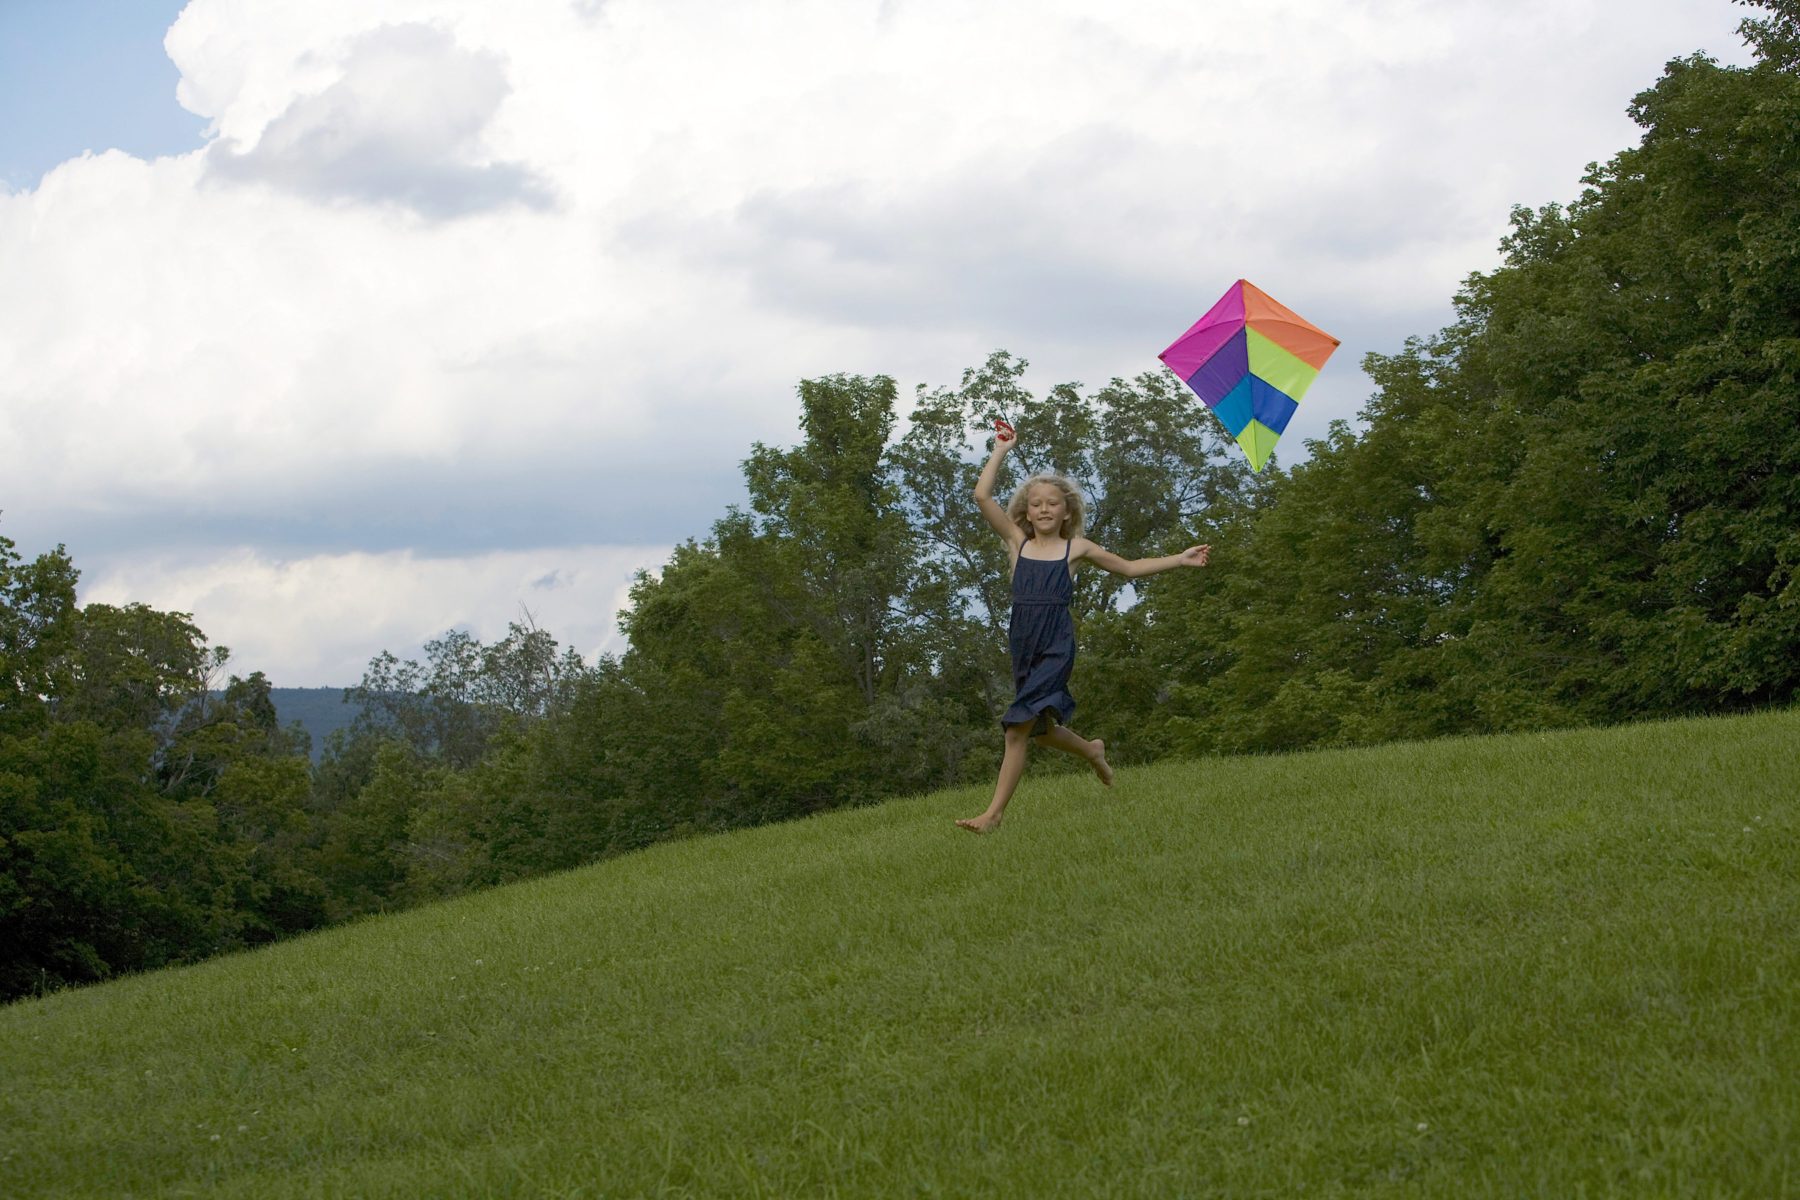 Girl running with a kite.